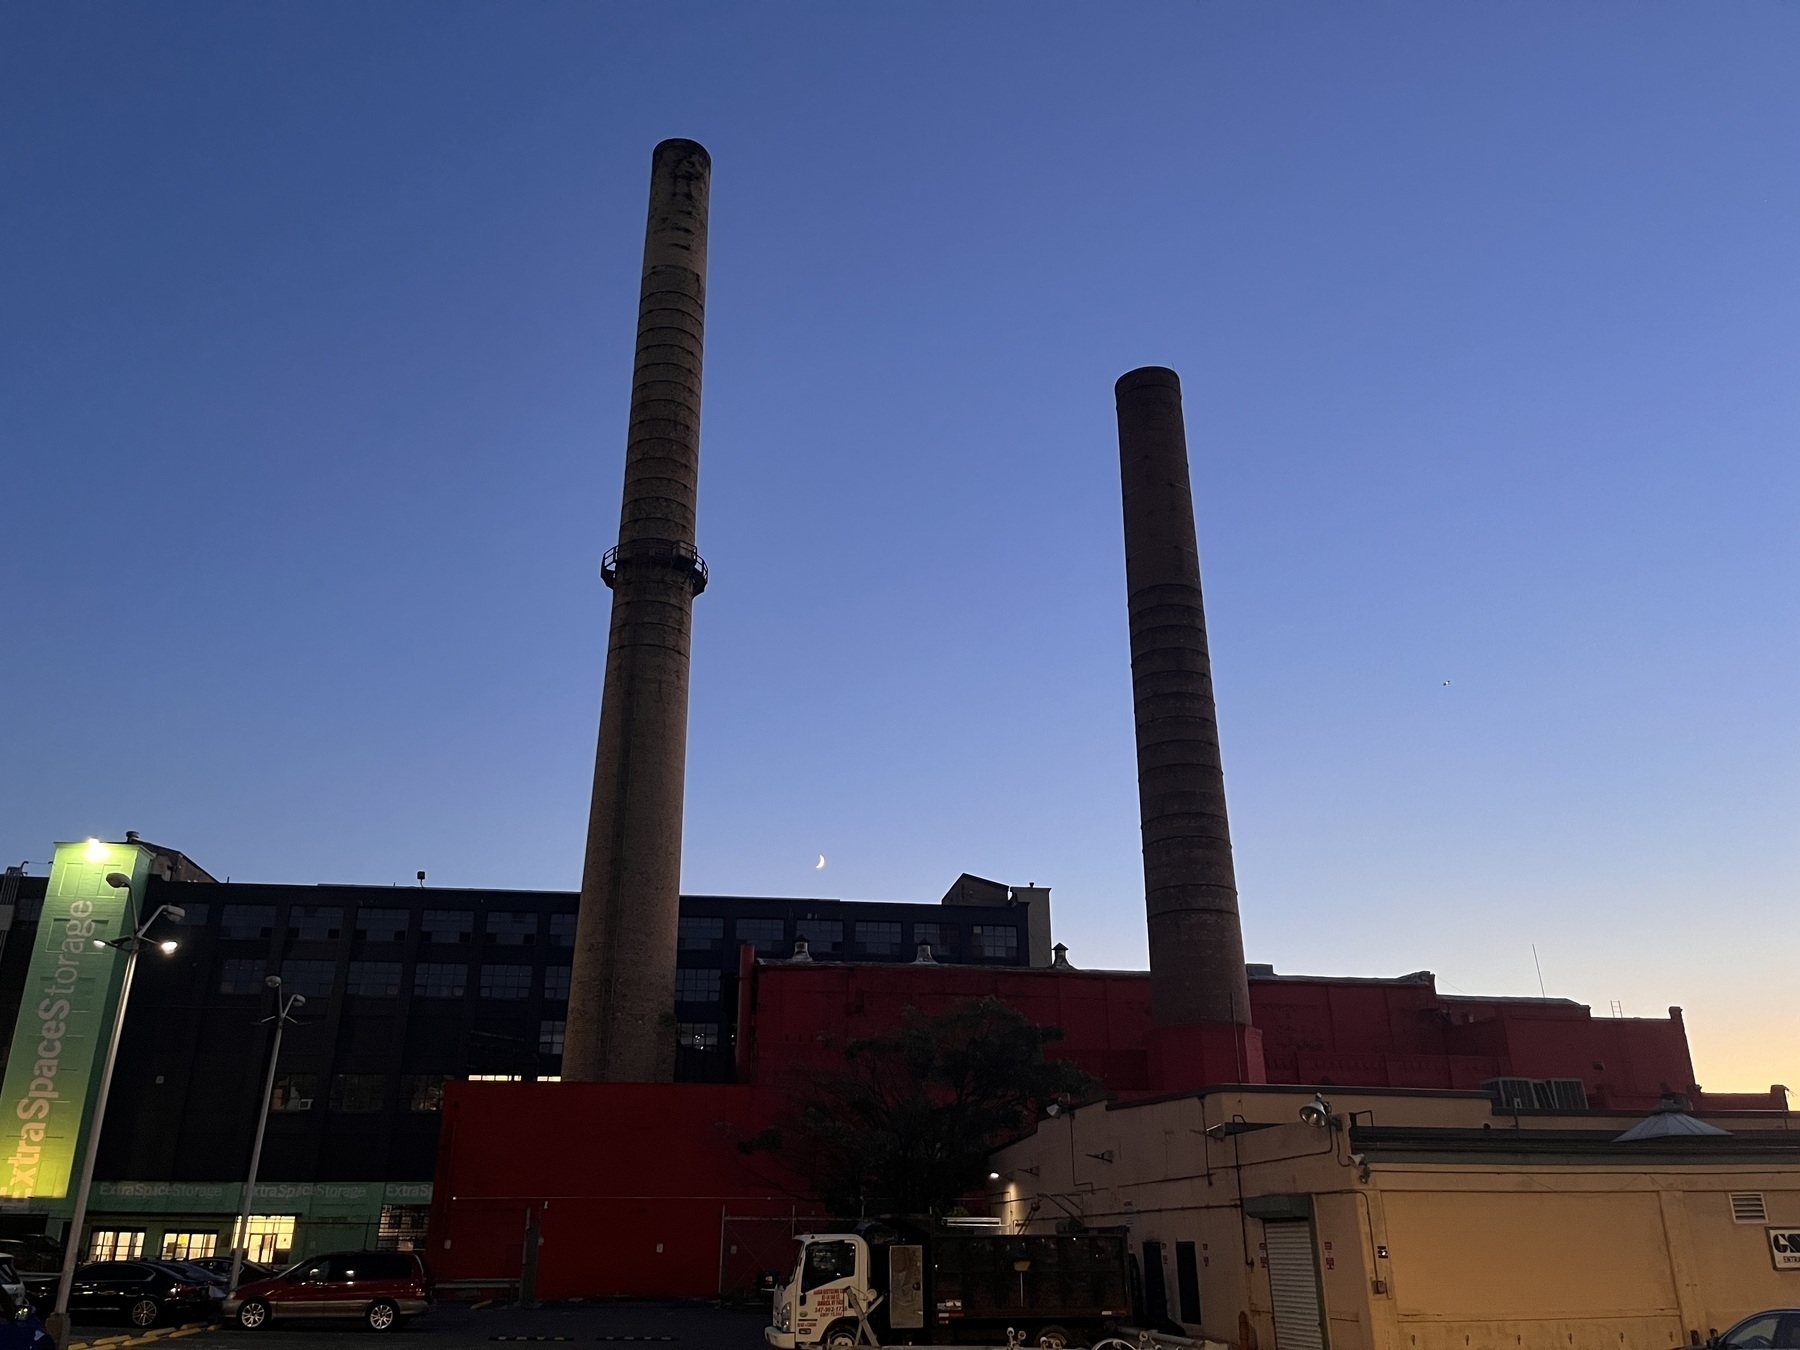 Two abandoned smoke stacks against a darkening sky, light still holding on in the corner. A sliver of a moon rests low between the smokestacks , right above industrial buildings. In the foreground is a truck. 